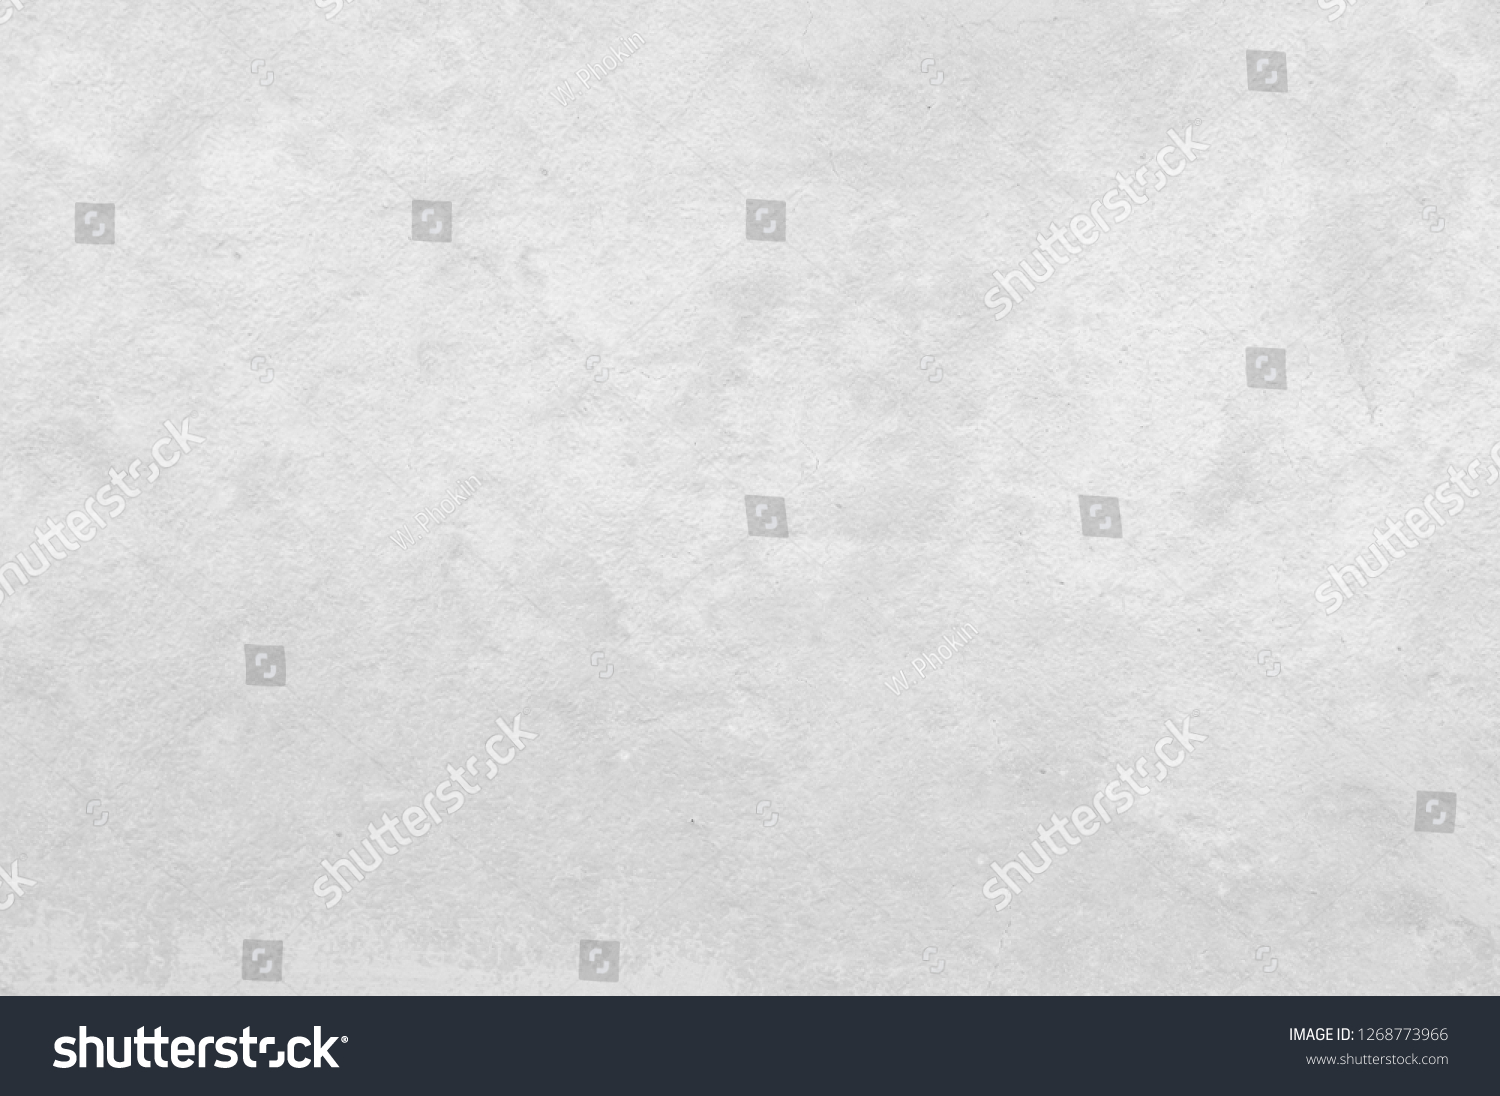 Art concrete or stone texture for background in black, grey and white colors. Cement and sand wall of tone vintage. #1268773966